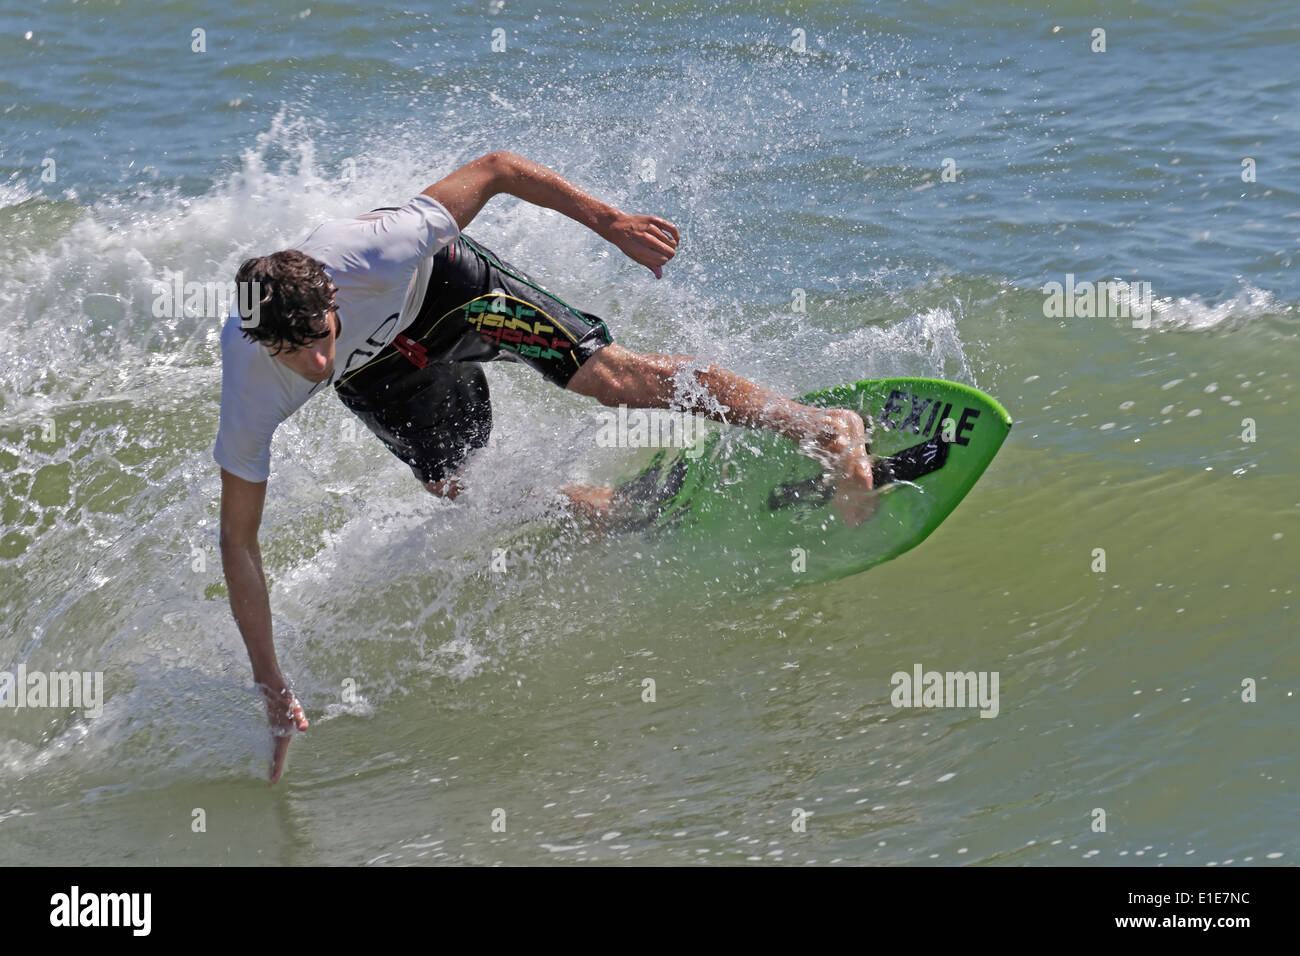 Skimboard Competitor in Rides a Wave Stock Photo